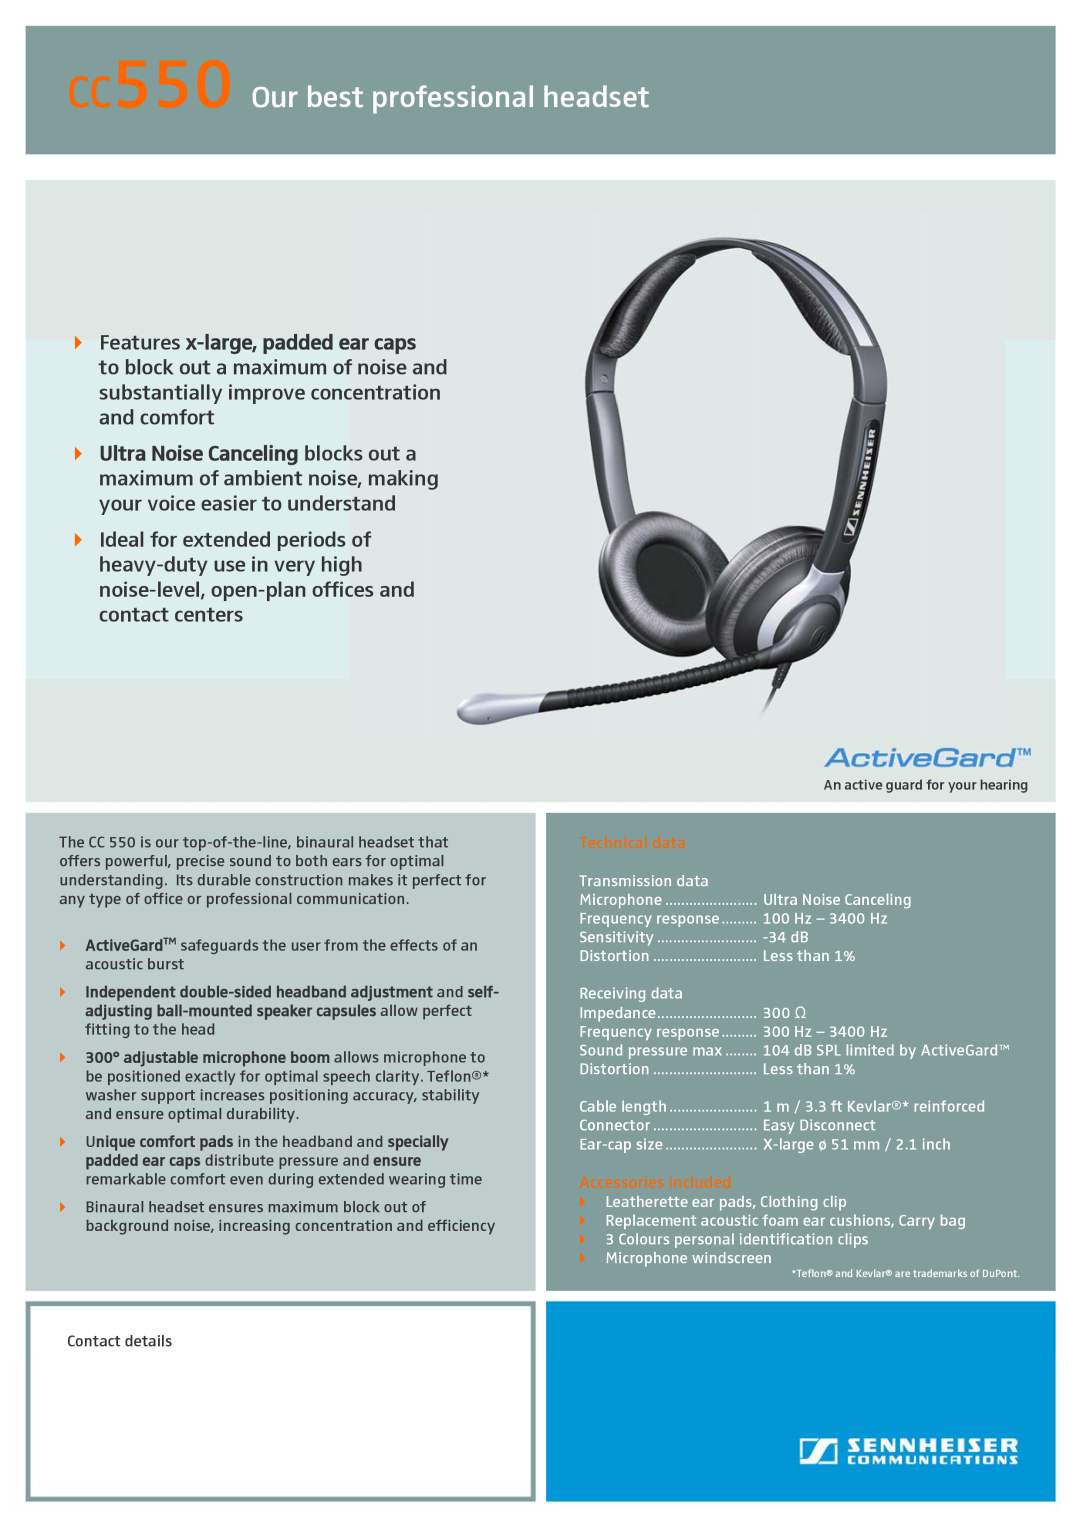 Sennheiser manual CC550 Our best professional headset, Features x-large,padded ear caps 